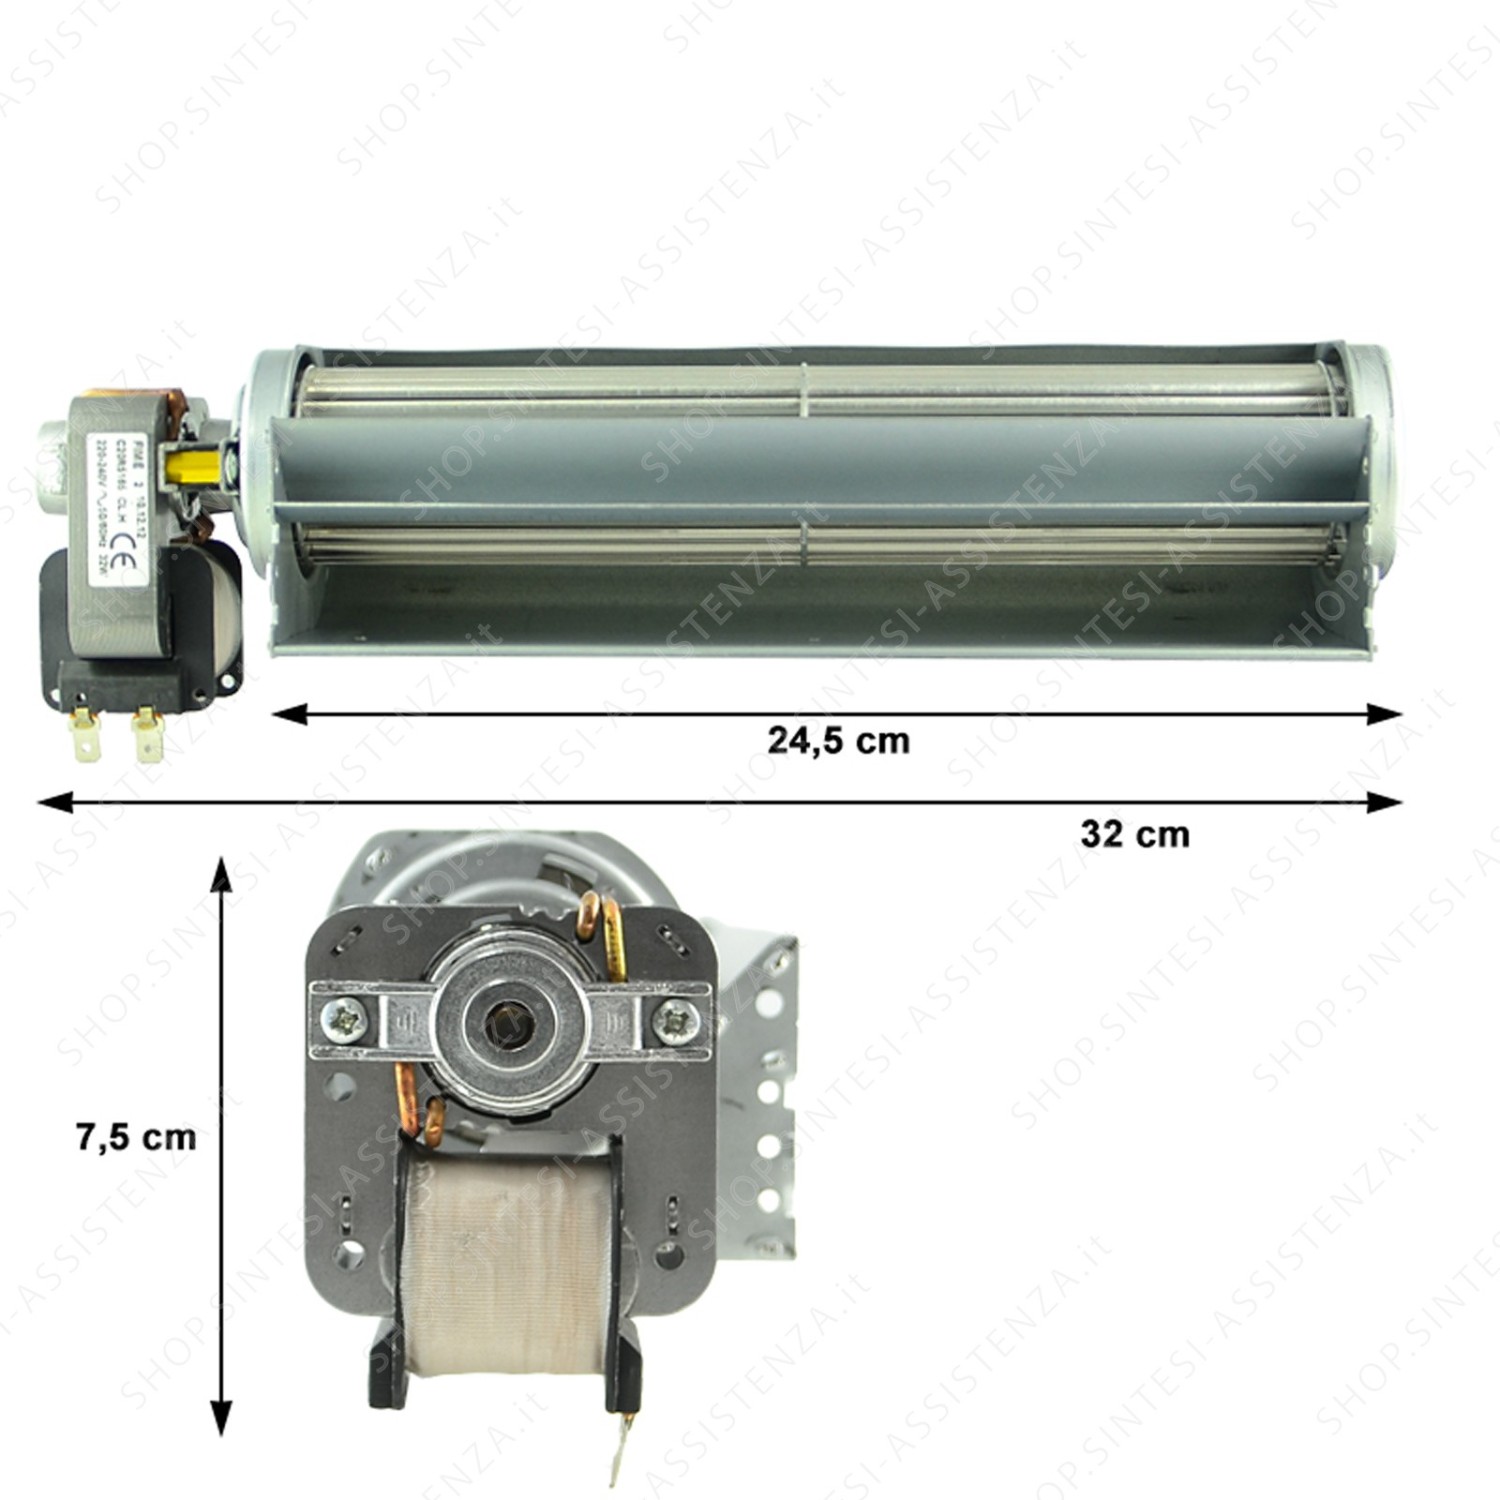 TANGENTIAL COOLING MOTOR FOR SMEG SC45 MICROWAVE OVEN - 699250094